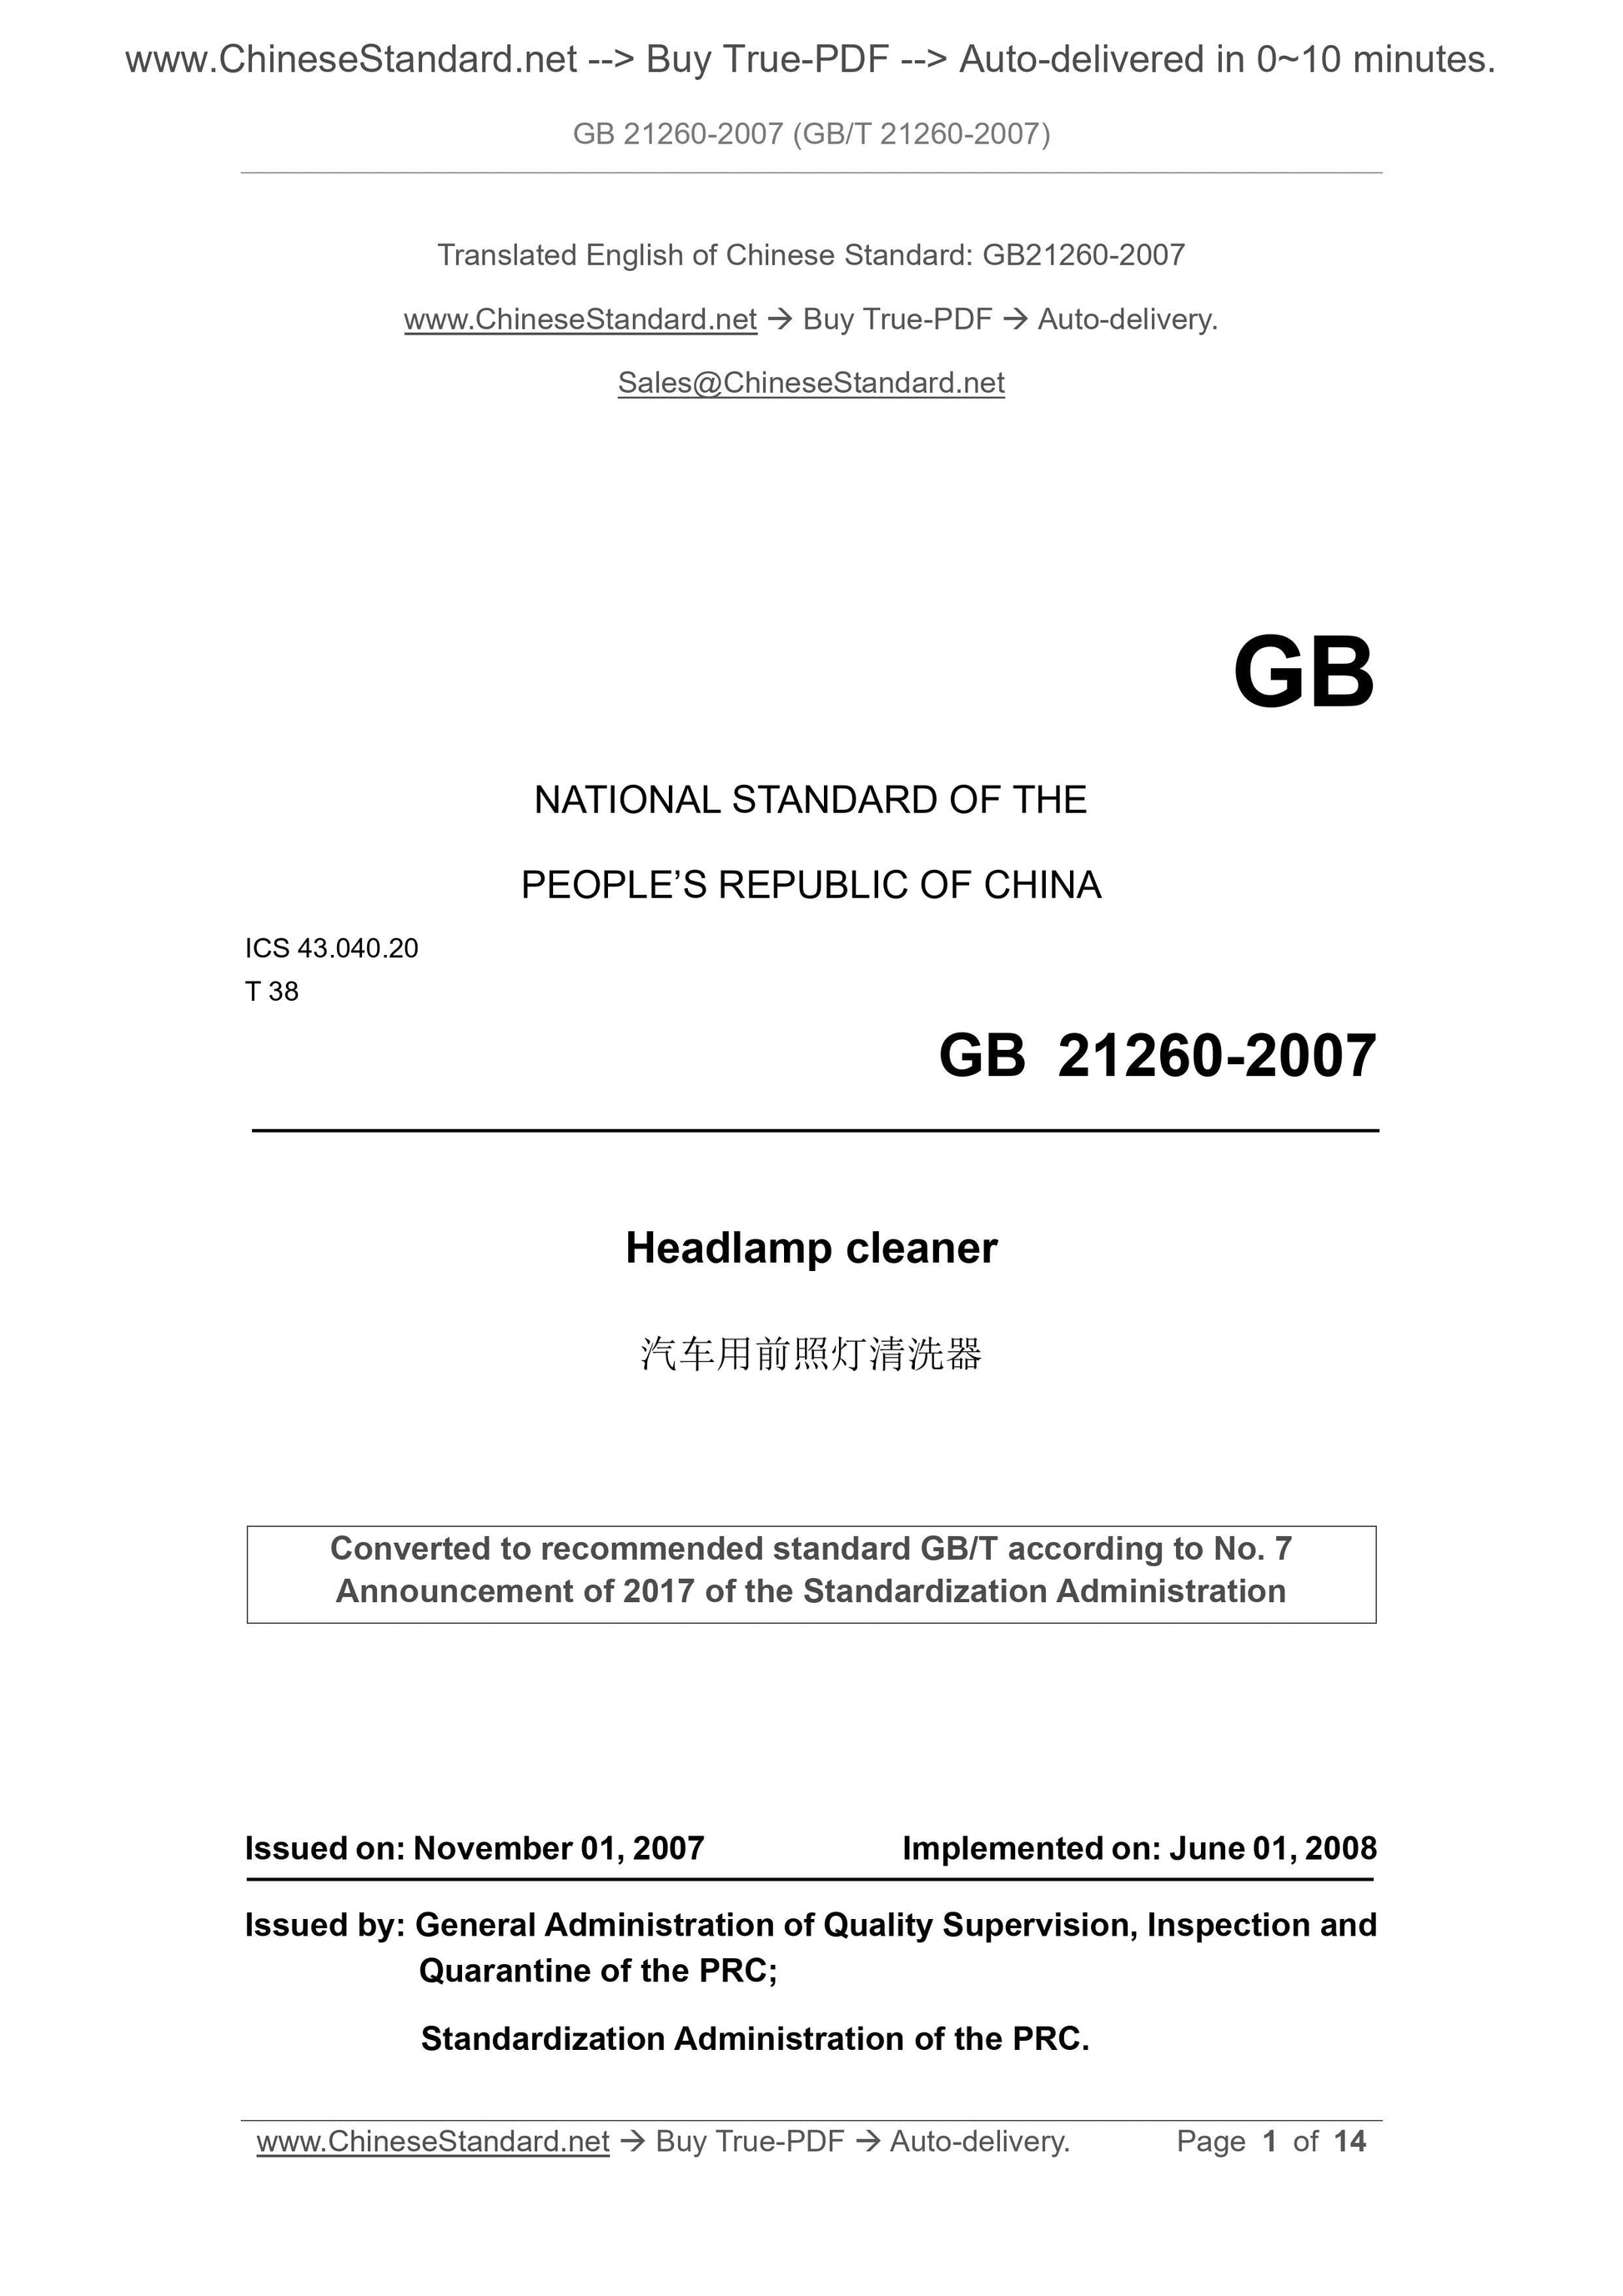 GB 21260-2007 Page 1